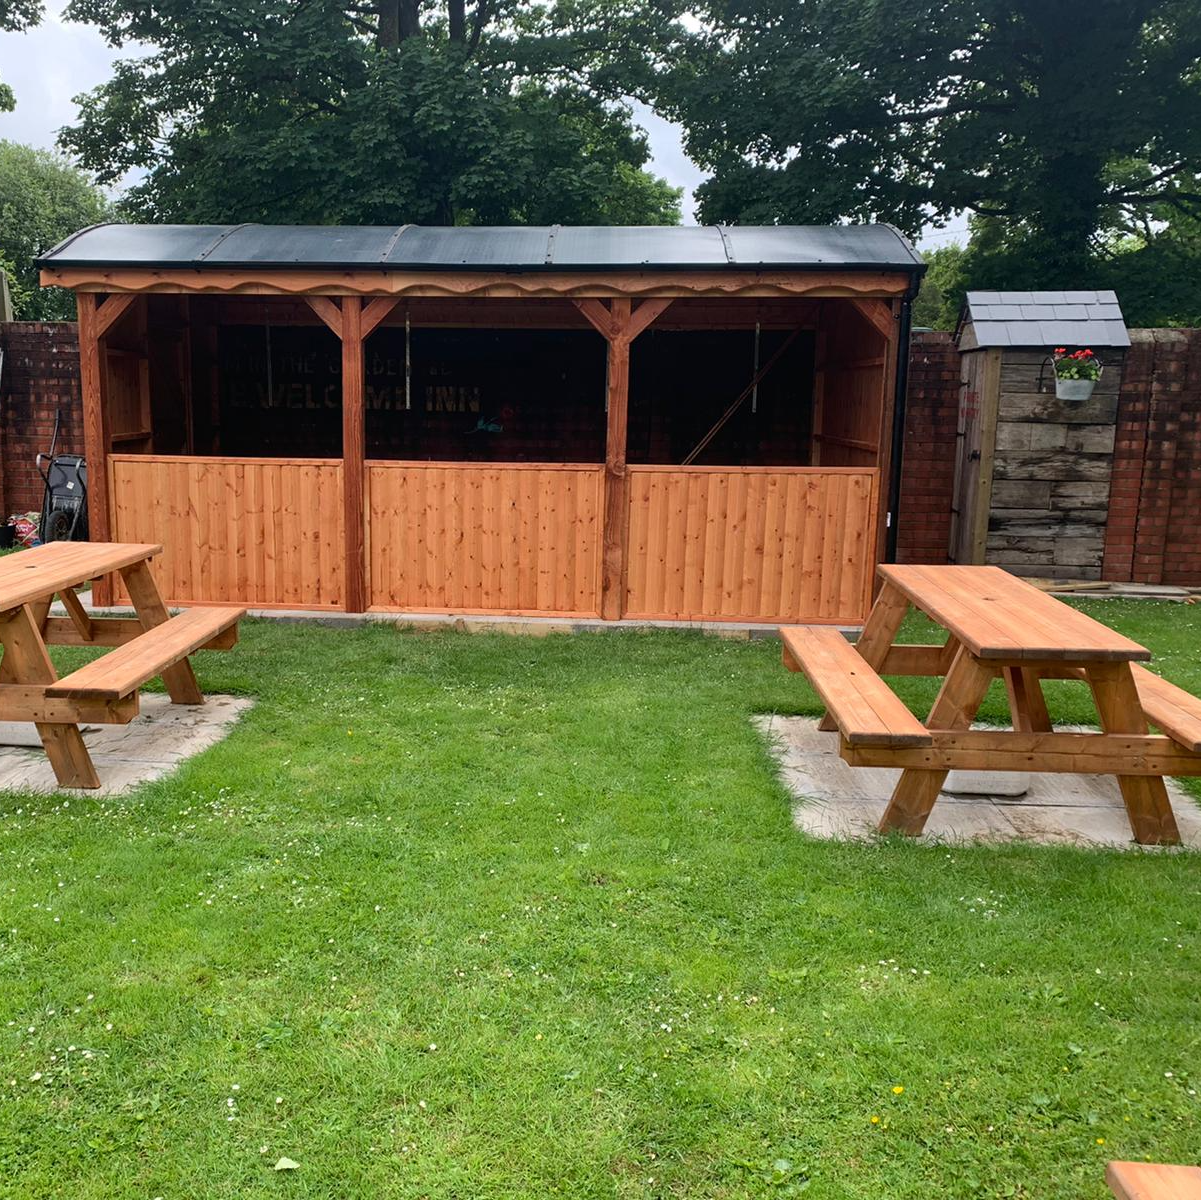 Curved roof serving bar in the gardens of The Welcome Inn in swansea